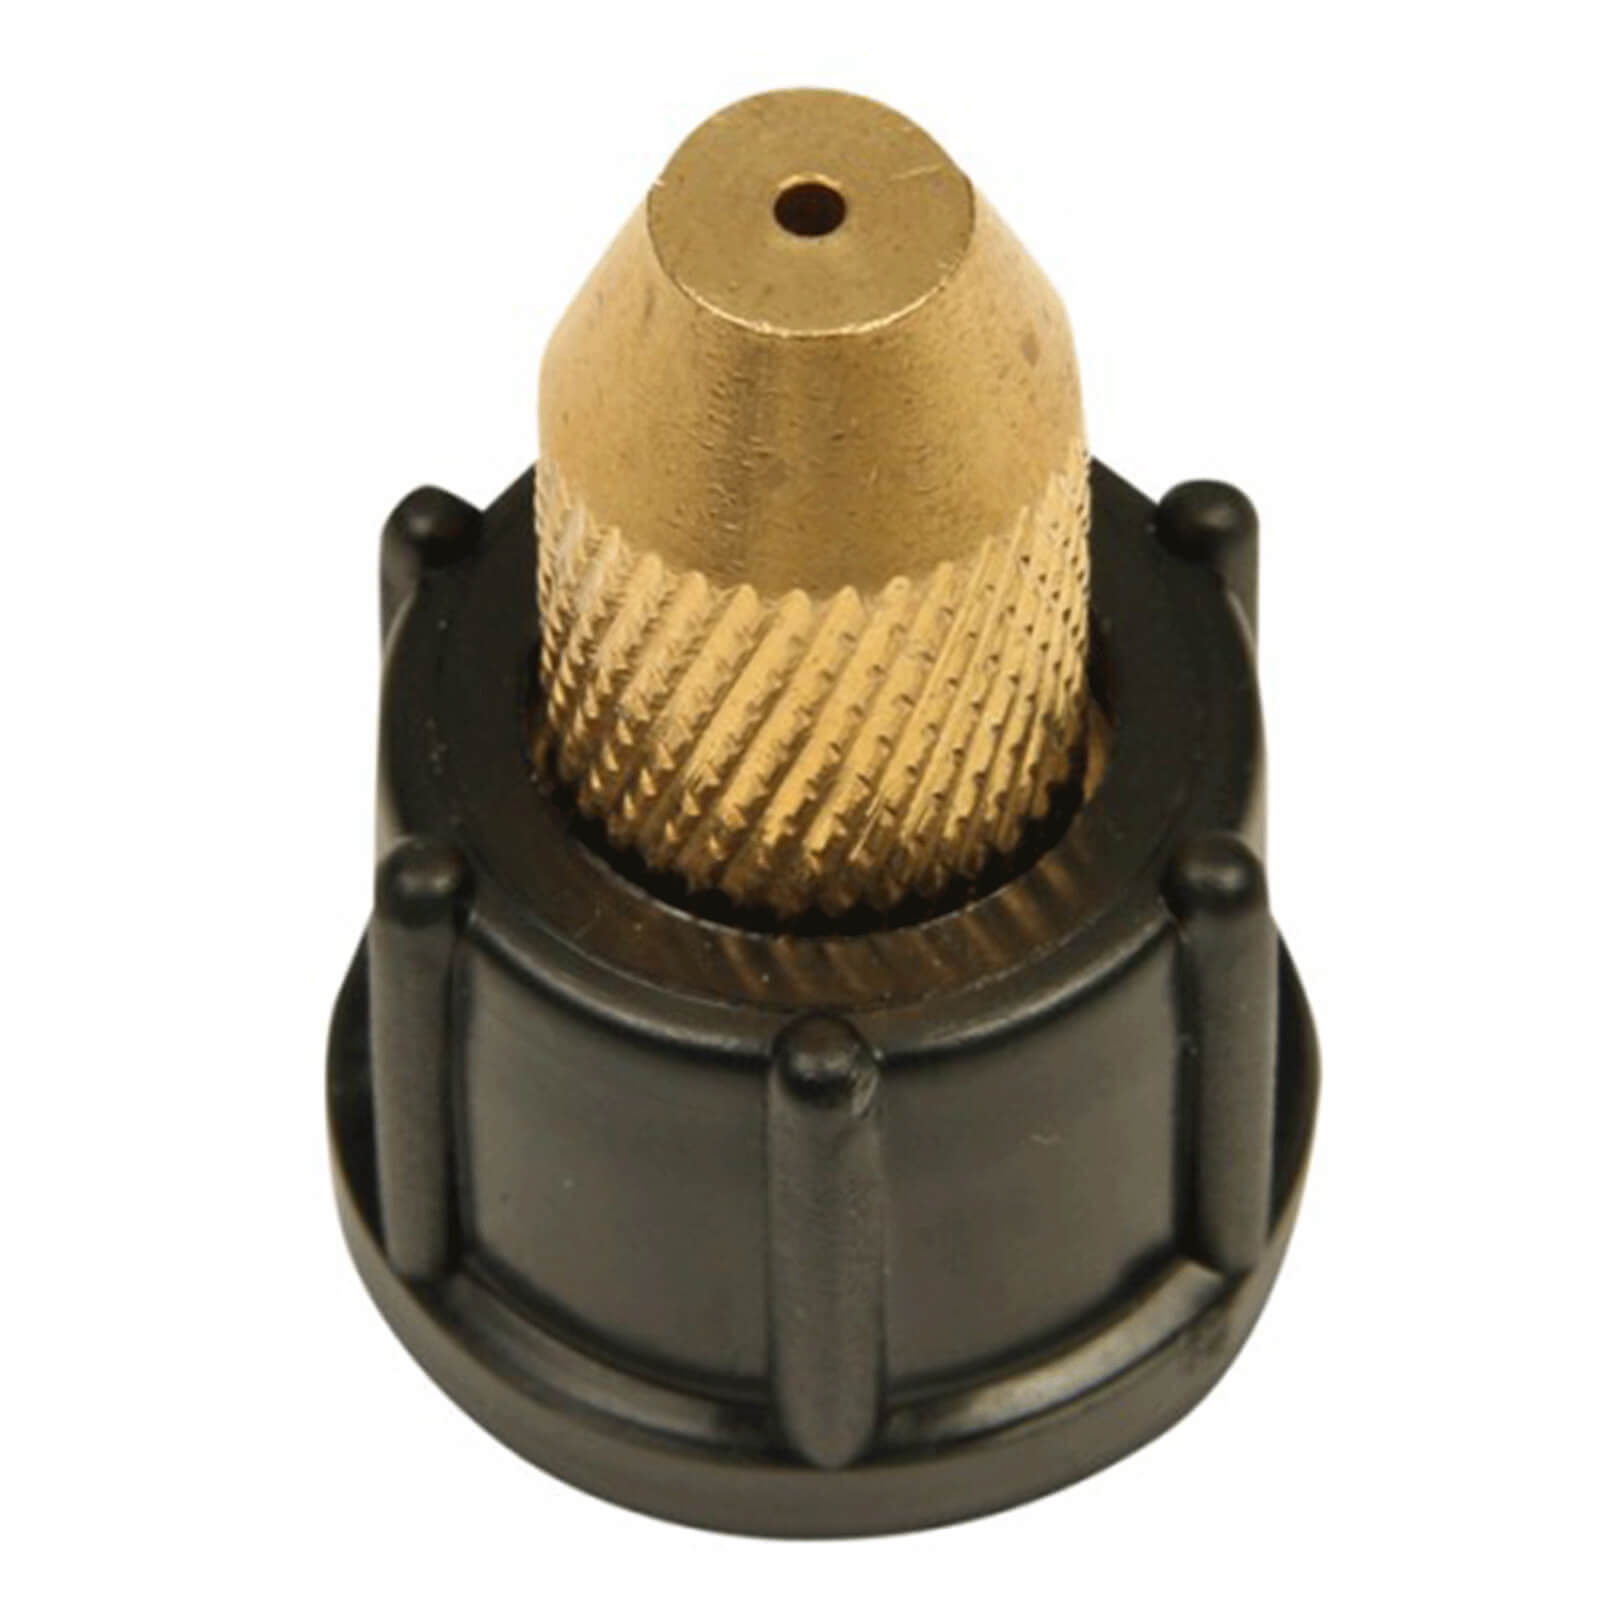 Image of Solo Adjustable High Pressure Brass Nozzle for Pressure Sprayers